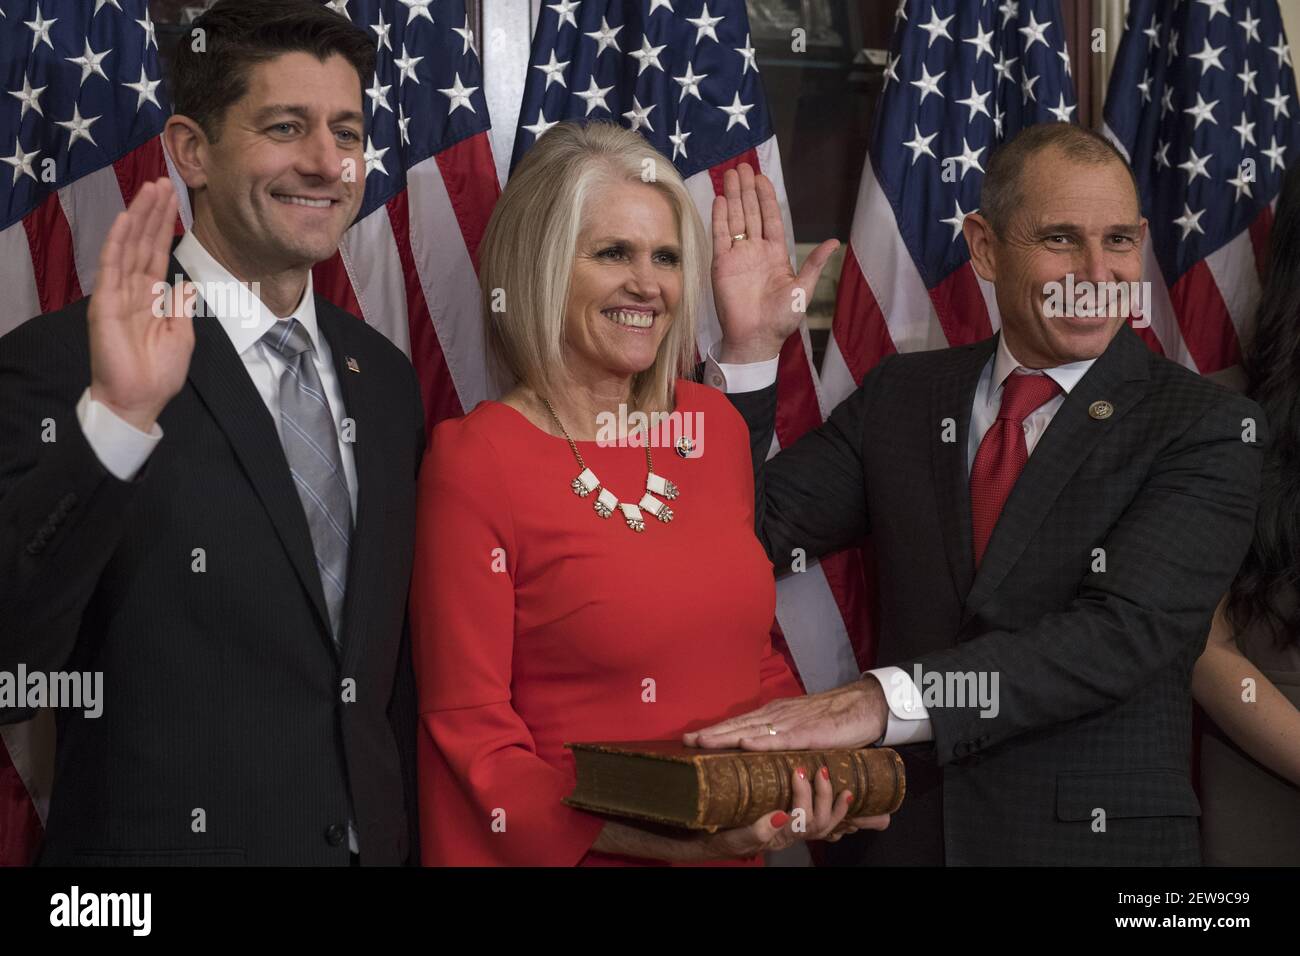 UNITED STATES - NOVEMBER 13: Rep. John Curtis, R-Utah, right, and his wife, Sue, participate in a swearing-in ceremony in the Capitol with Speaker Paul Ryan, R-Wis., before the actual event on the House floor on November 13, 2017. (Photo By Tom Williams/CQ Roll Call) Stock Photo